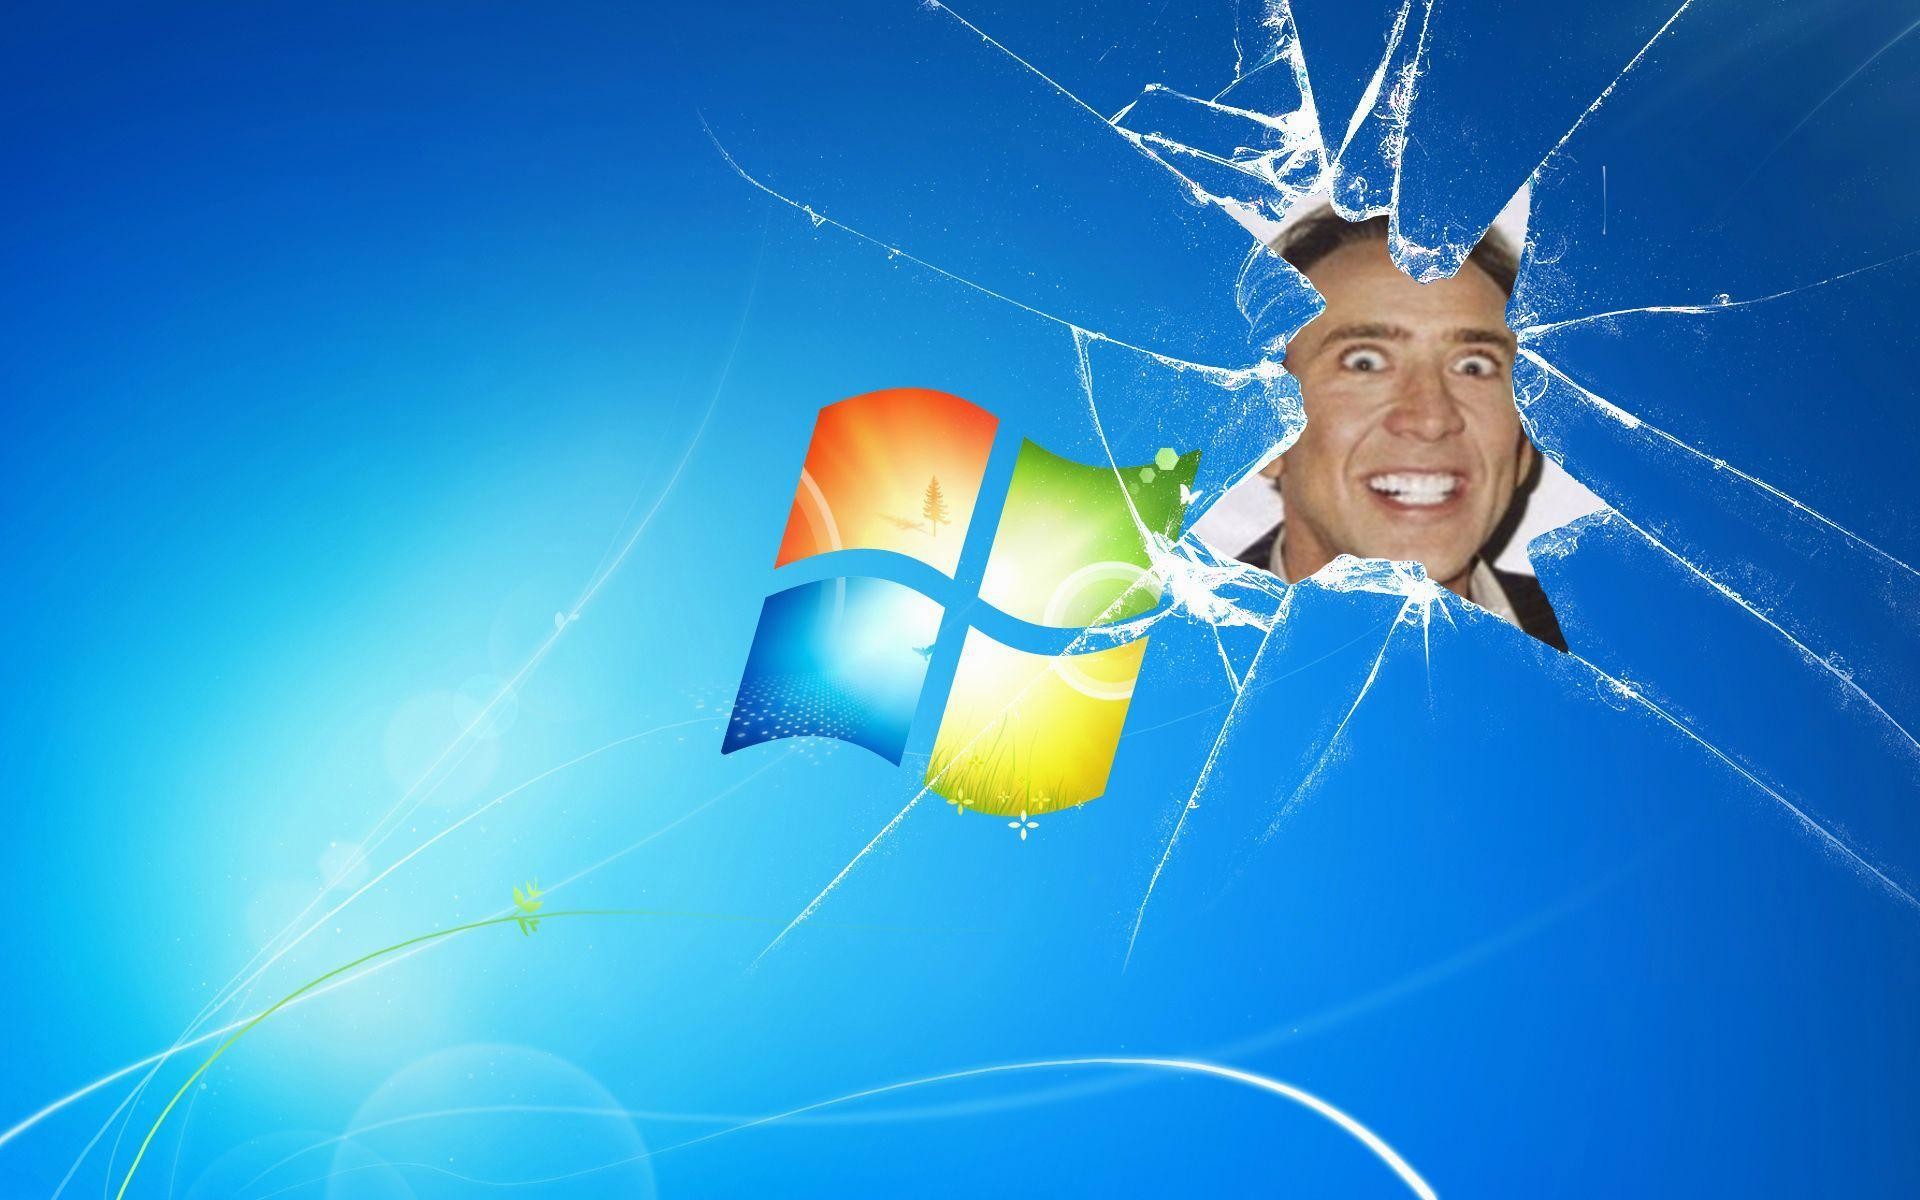 Wiki Free Meme Picture Download Pic Wpe006324 - Windows 7 Cracked Screen - HD Wallpaper 